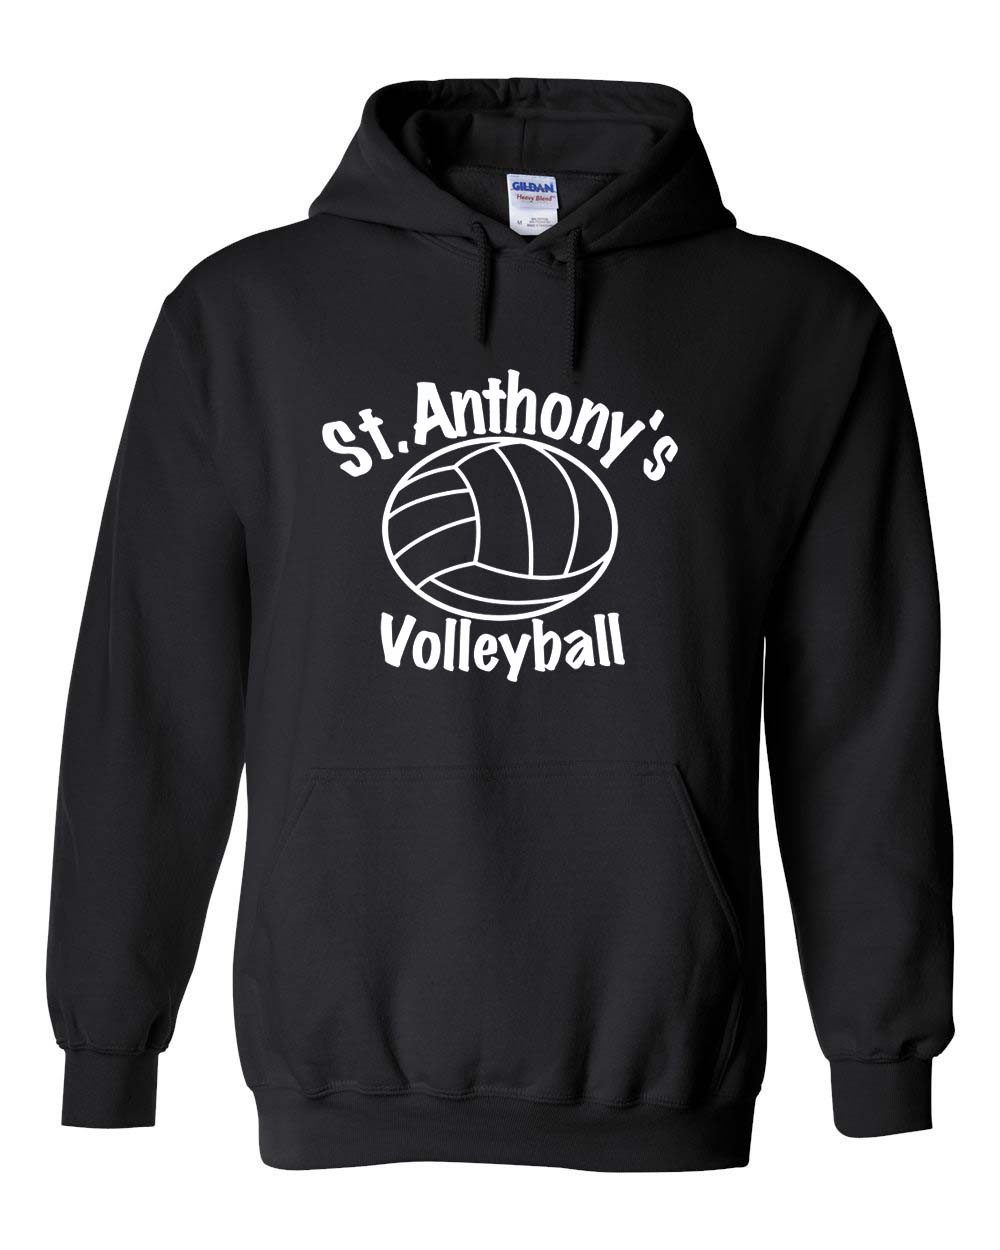 SAS Black Volleyball Team Hoodie w/Logo & Name/Number - Please Allow 2-3 Weeks For Delivery 